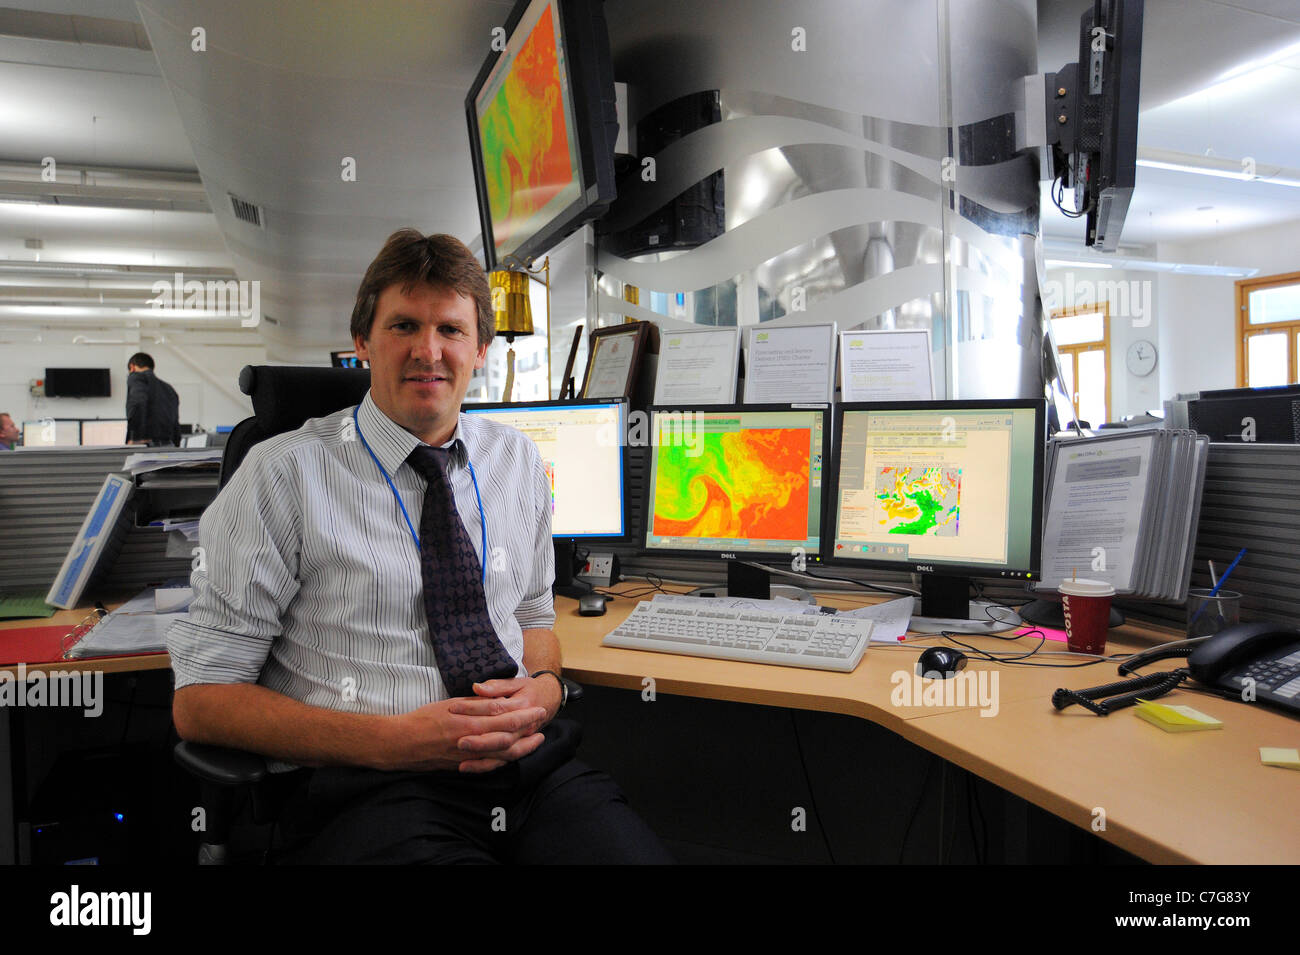 Tim Hewson - Chief Forecaster at the Met Office. Pictured in The forecasting office at the Met Office in Exeter, Devon. Stock Photo